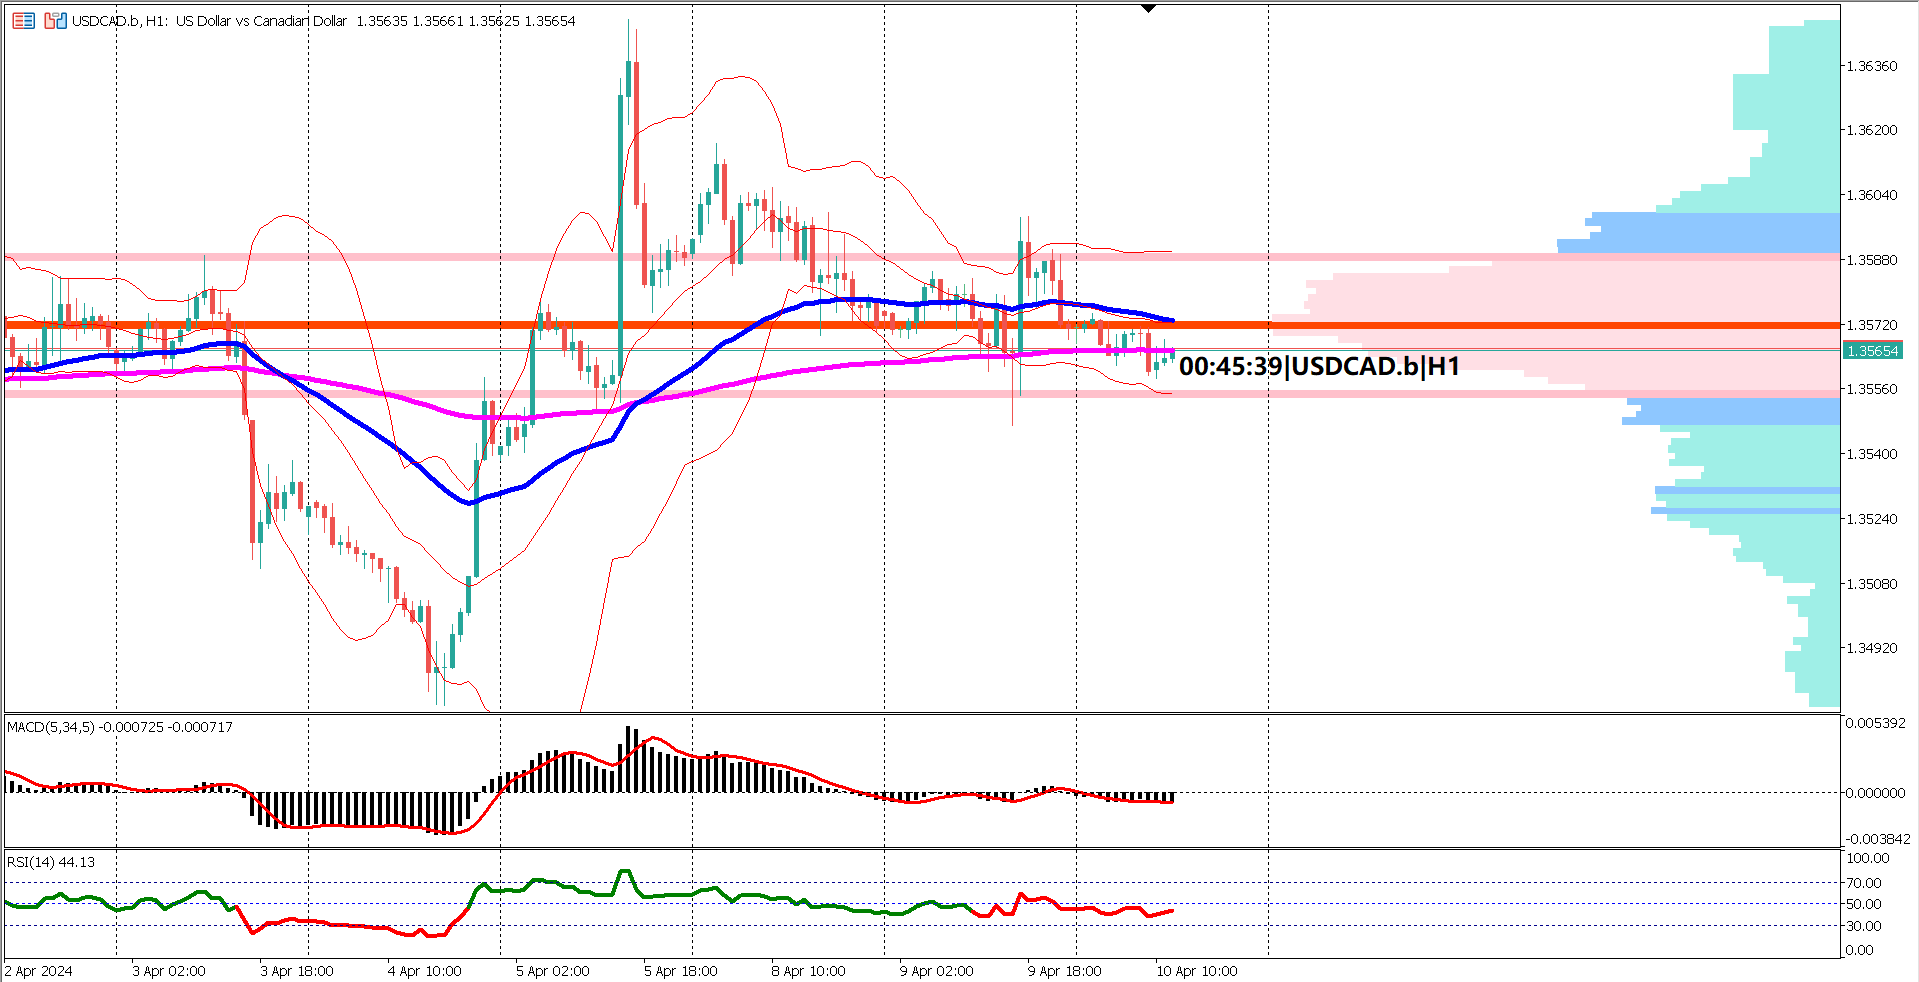 USDCAD Treads Lightly Ahead of BoC Decision Amid Firmer USD and Oil Prices